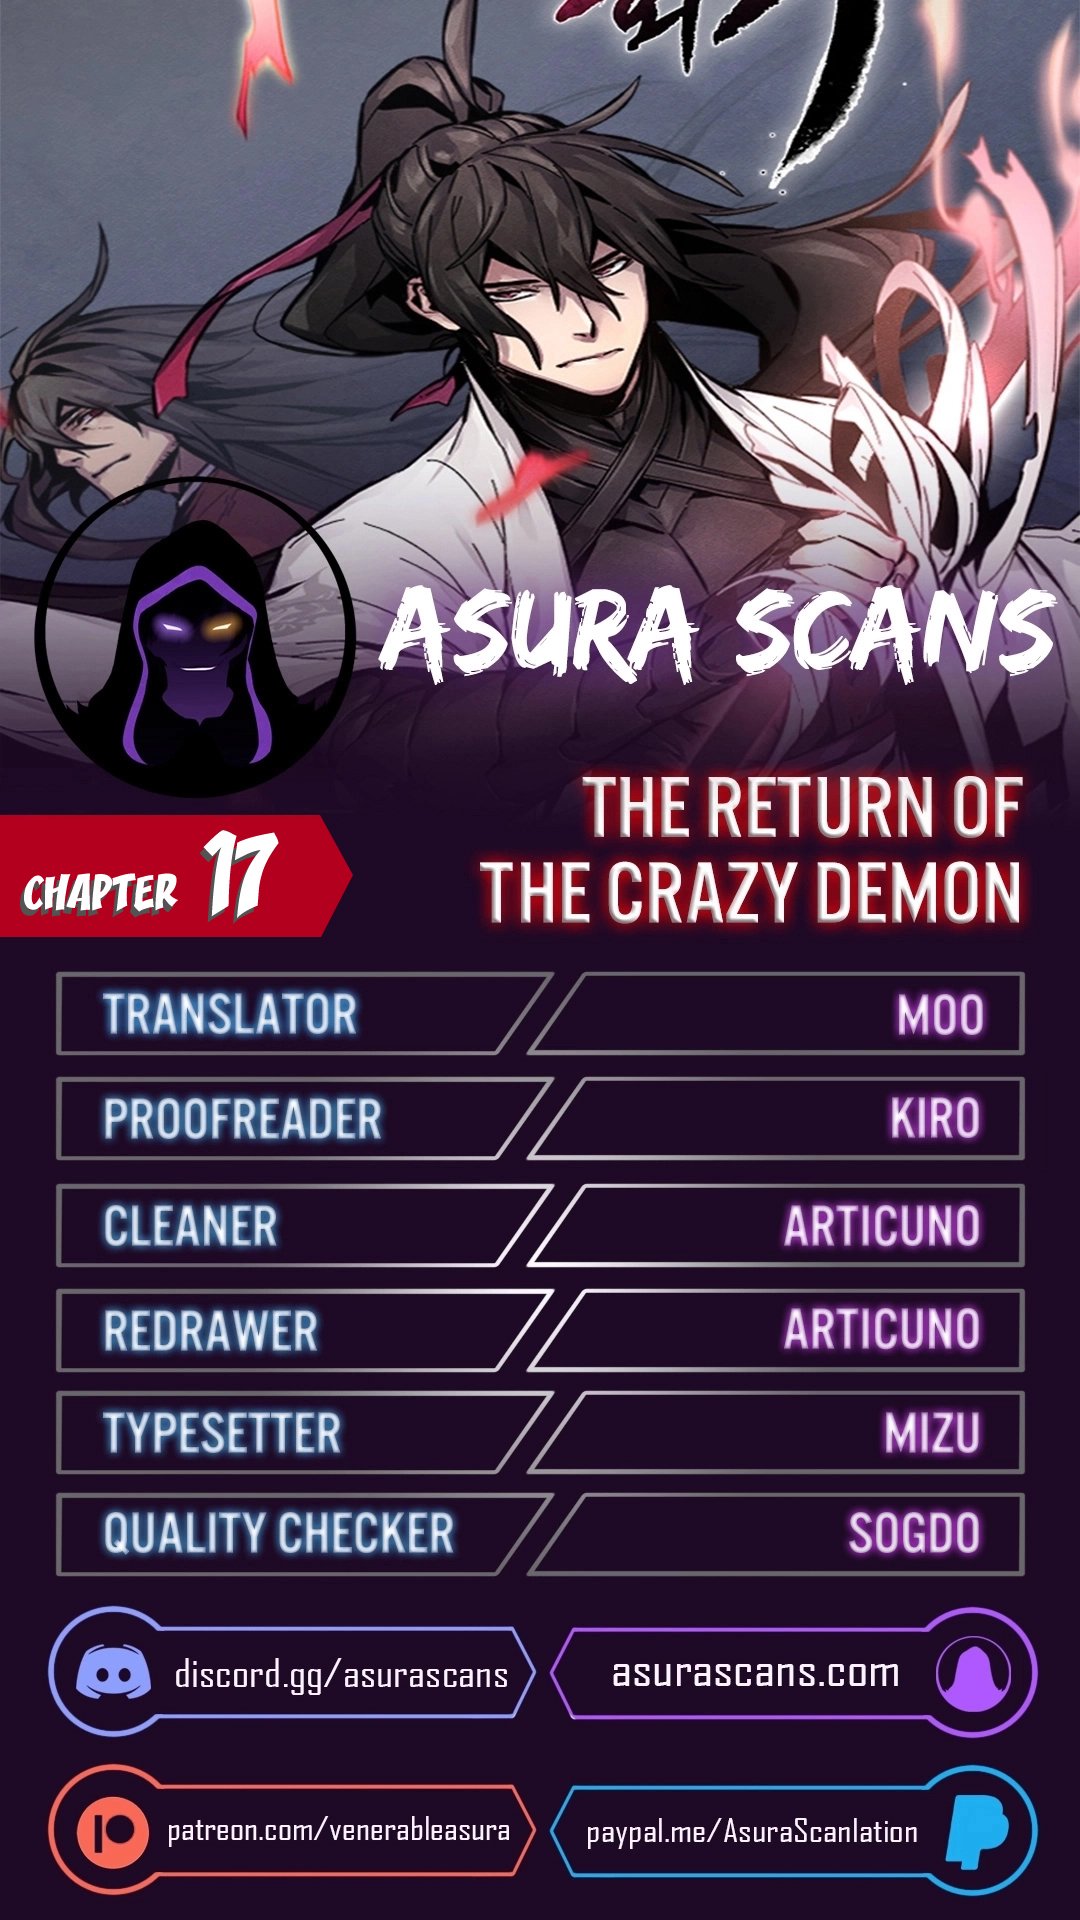 The Return of the Crazy Demon - Chapter 18558 - Image 1